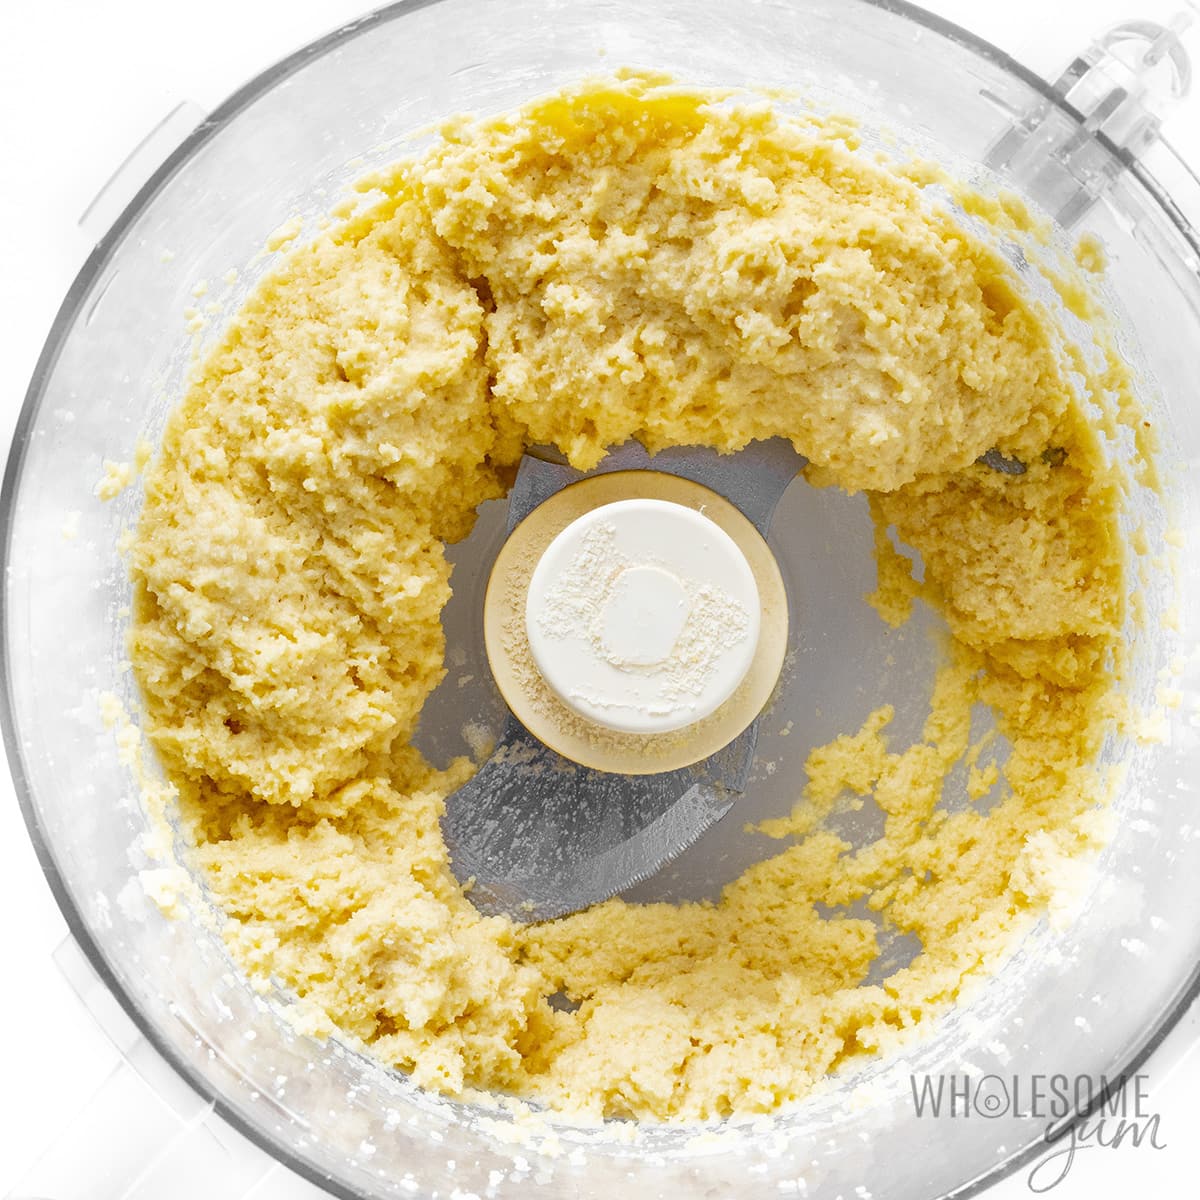 Eggs added to dry ingredients in food processor.